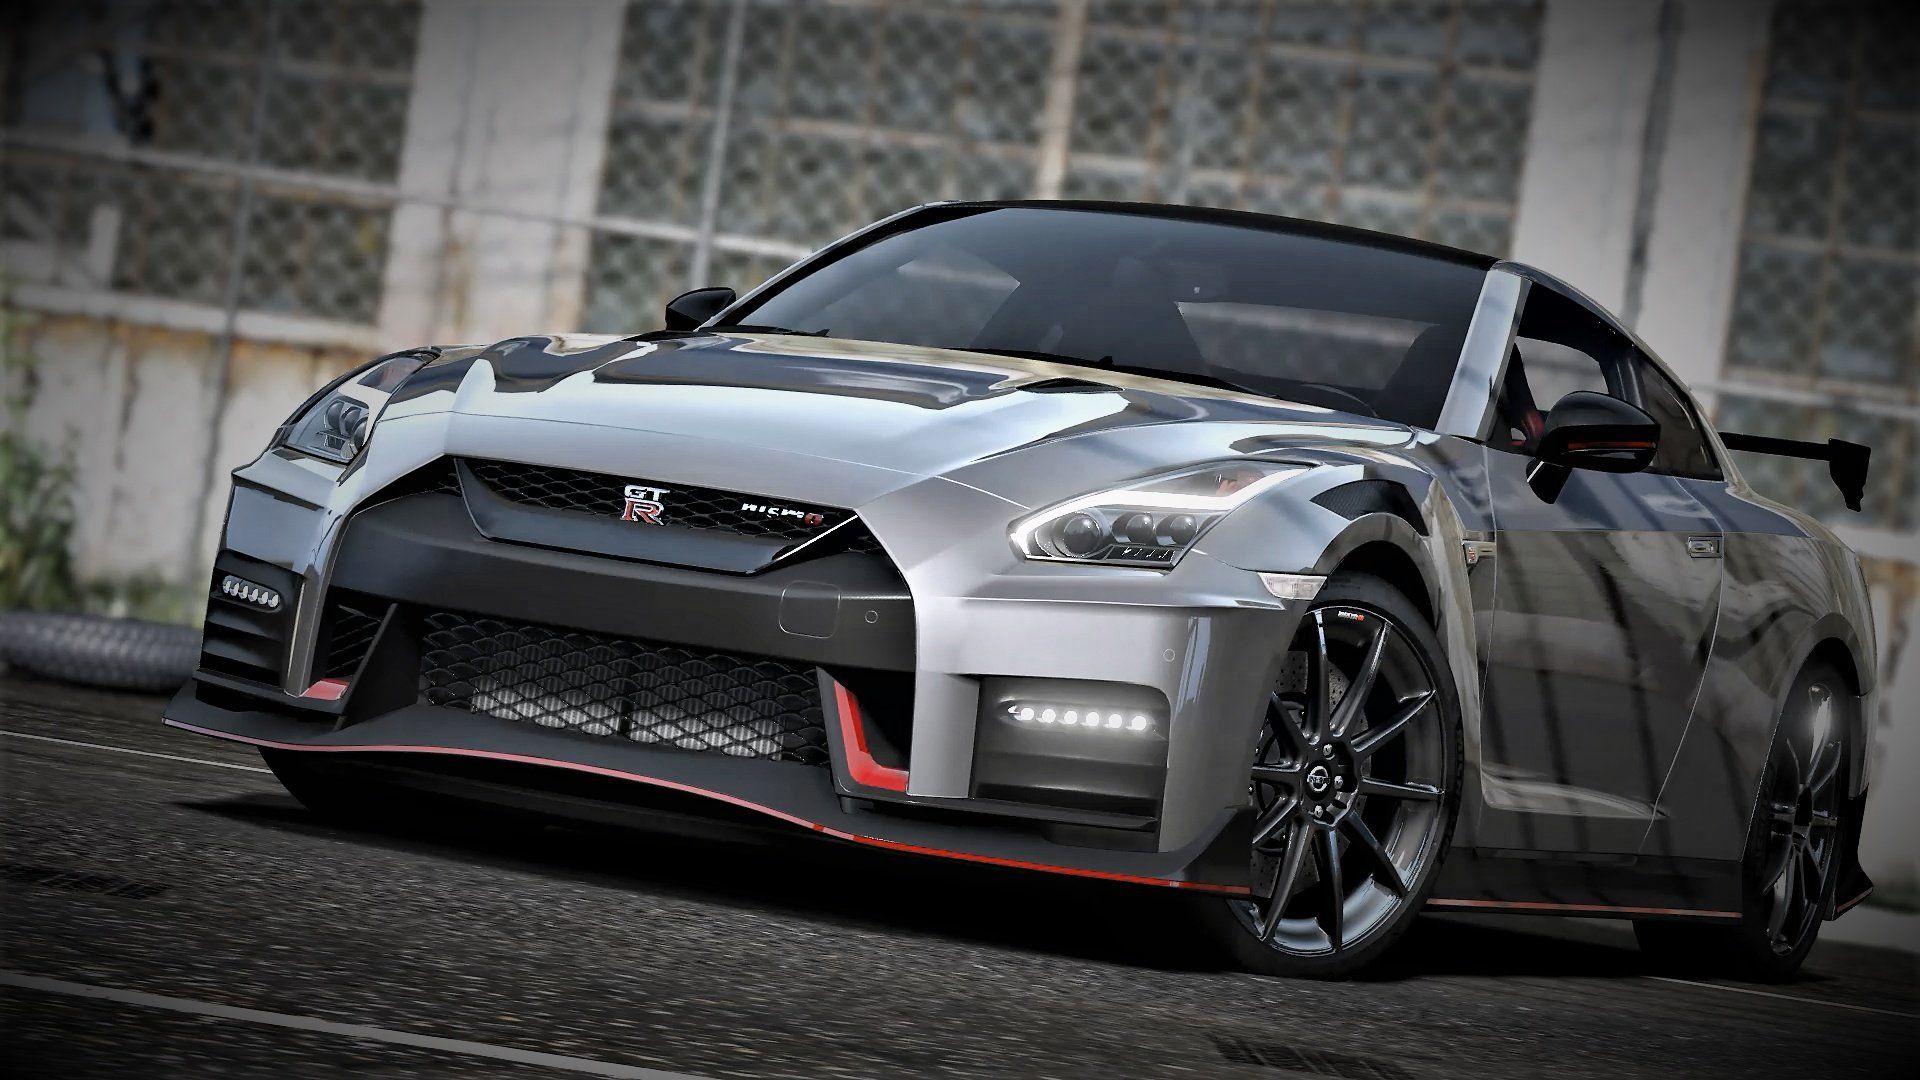 Nissan Gt R Sports Wallpapers Top Free Nissan Gt R Sports Backgrounds Wallpaperaccess